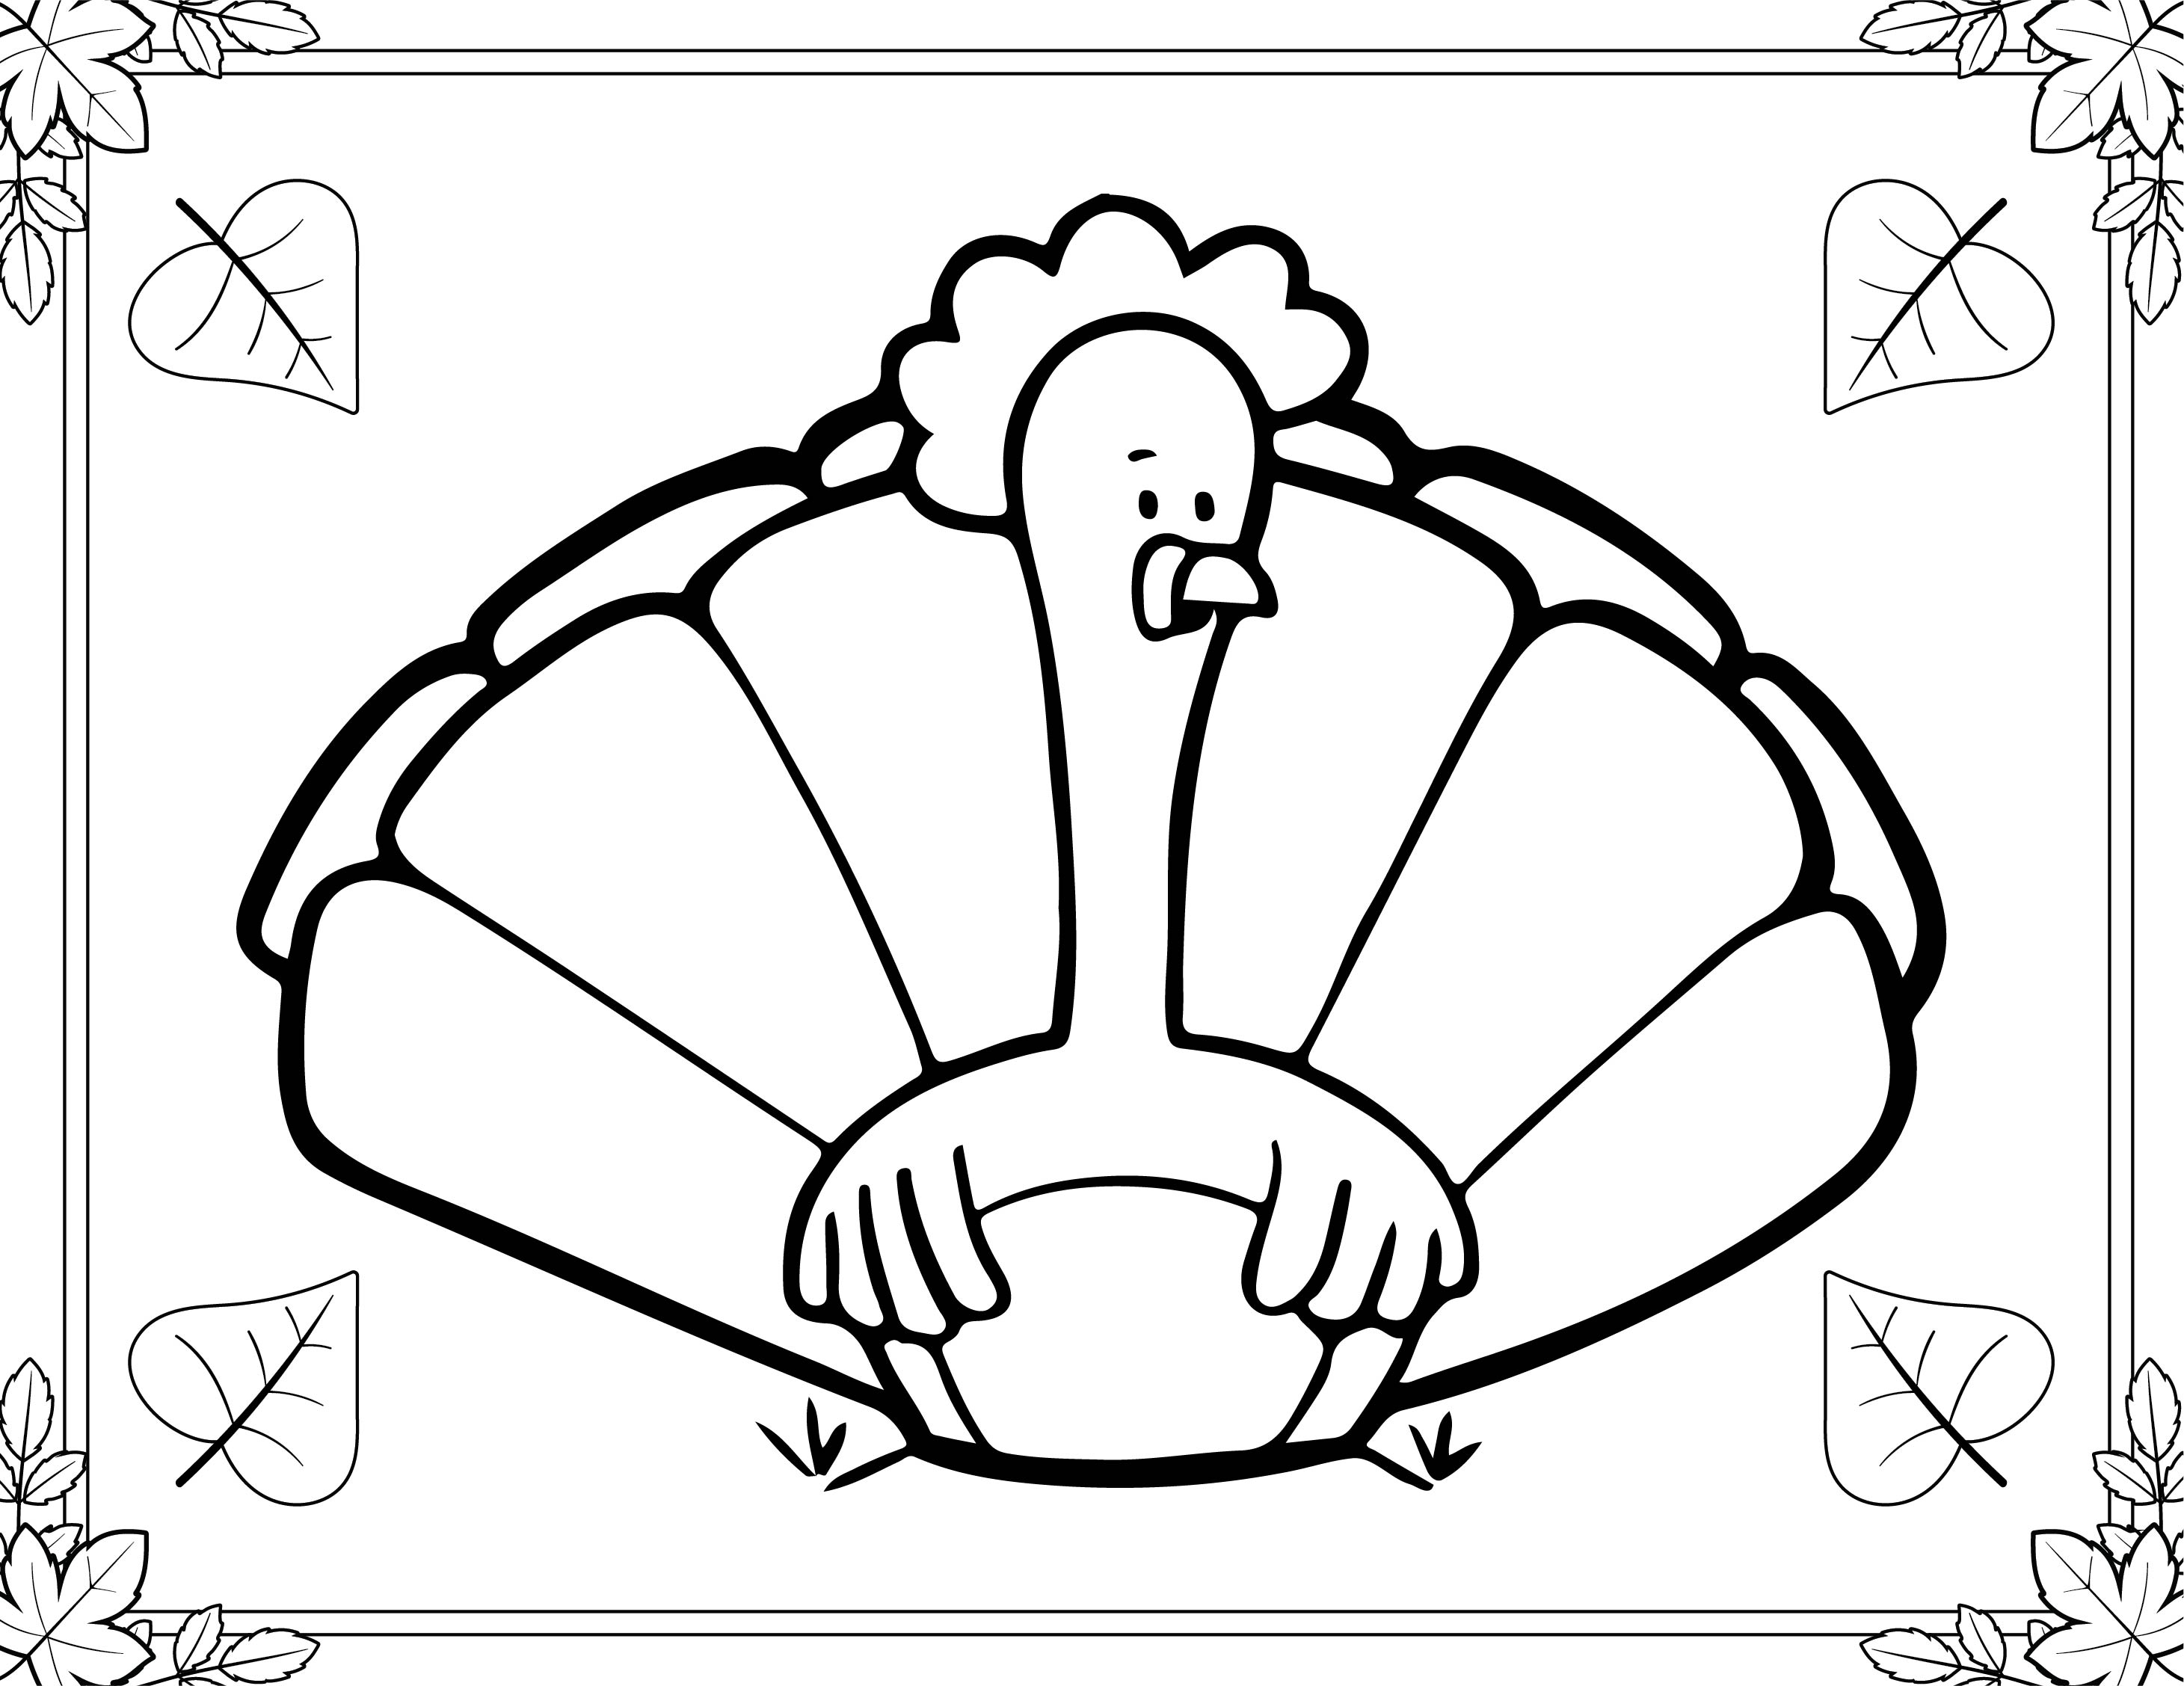 6-best-images-of-preschool-printables-thanksgiving-placemats